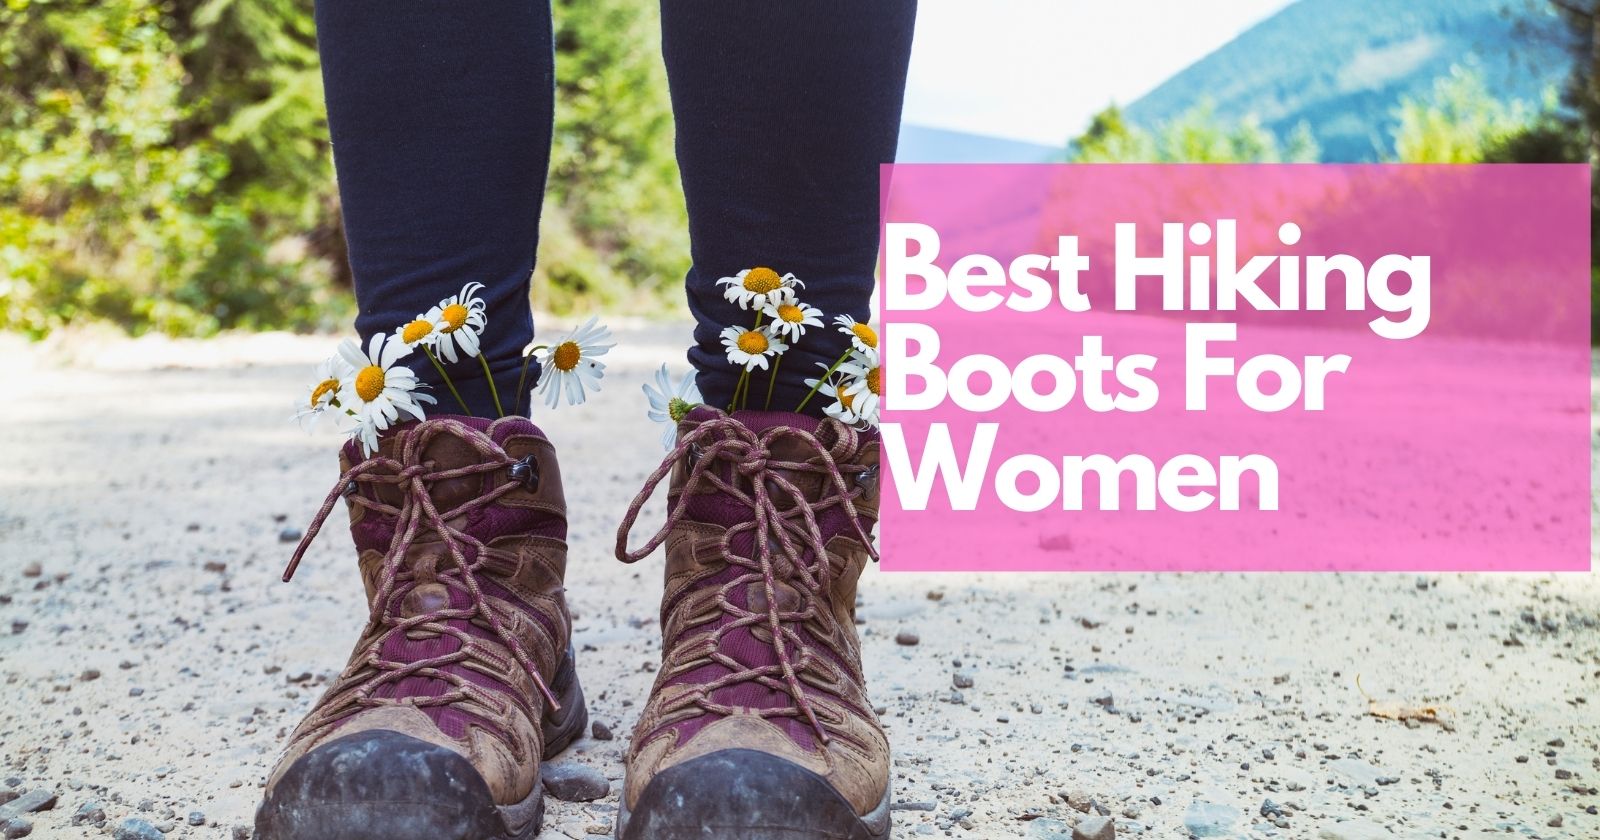 Best Hiking Boots For Women